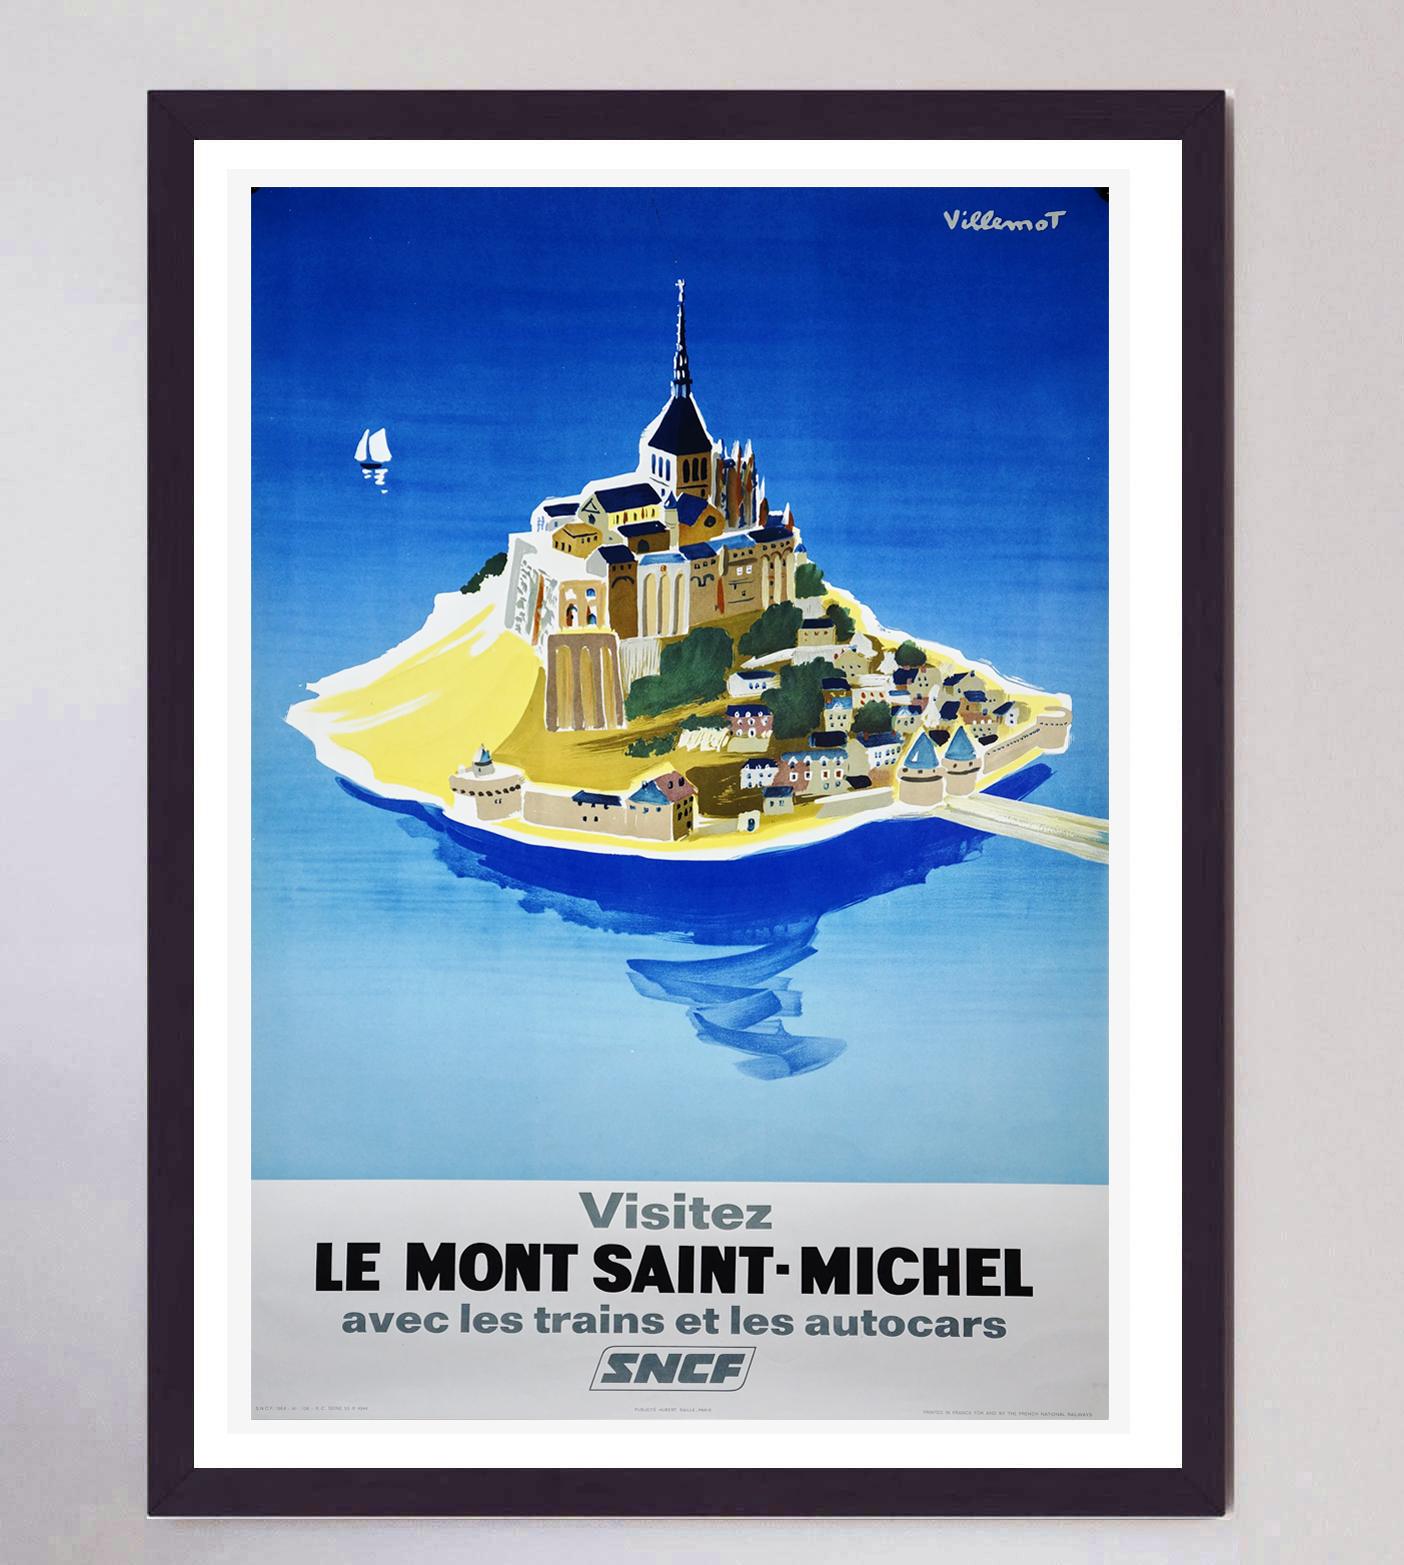 This gorgeous & rare poster for SNCF was designed by the iconic poster and graphic designer Bernard Villemot. Best known for his collaborations with the likes of Bally, Air France and Perrier, he is known as one of the greatest commercial artists of